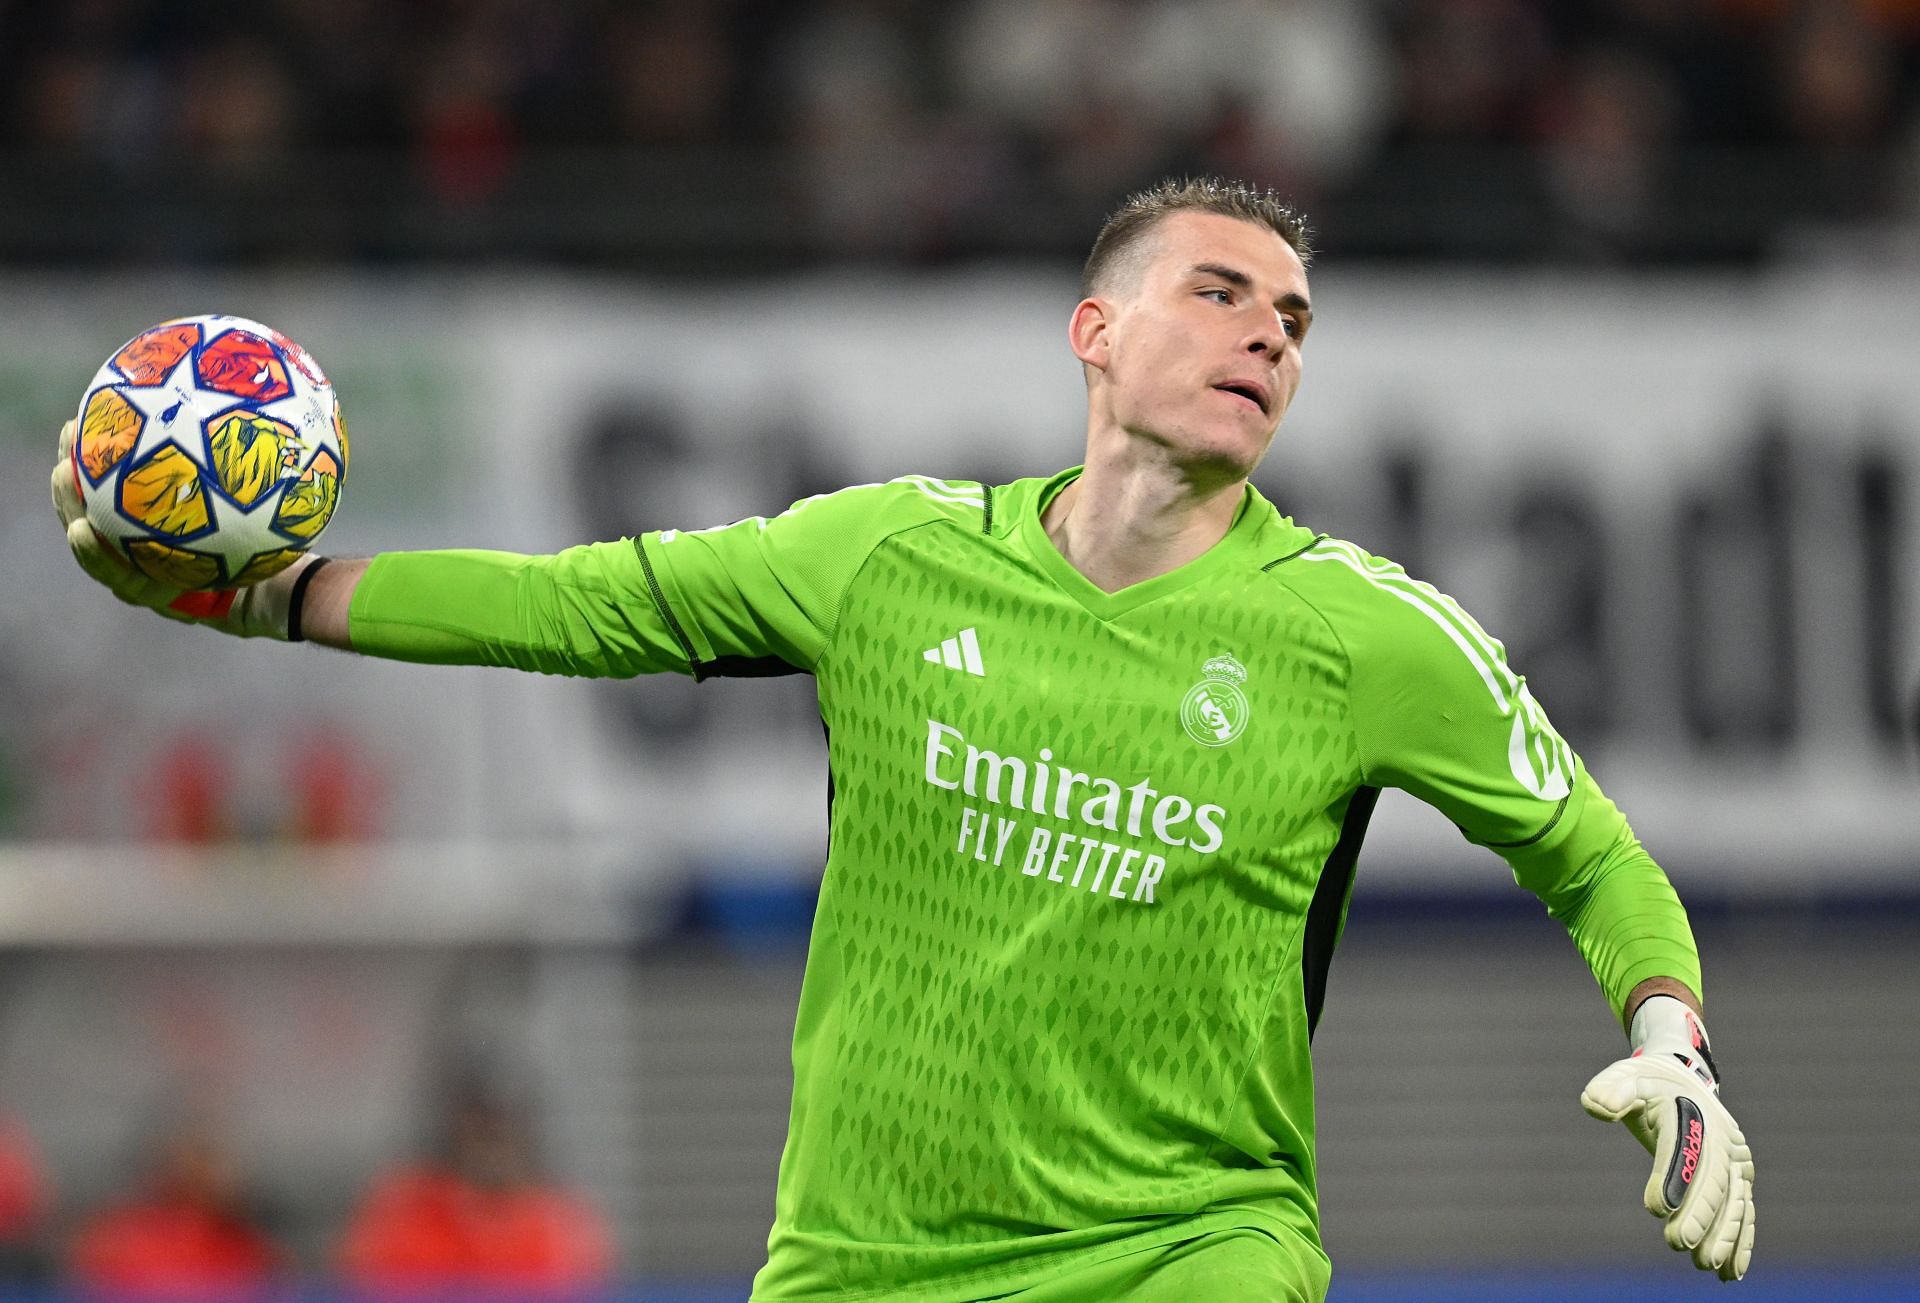 Lunin will be a man in demand this summer